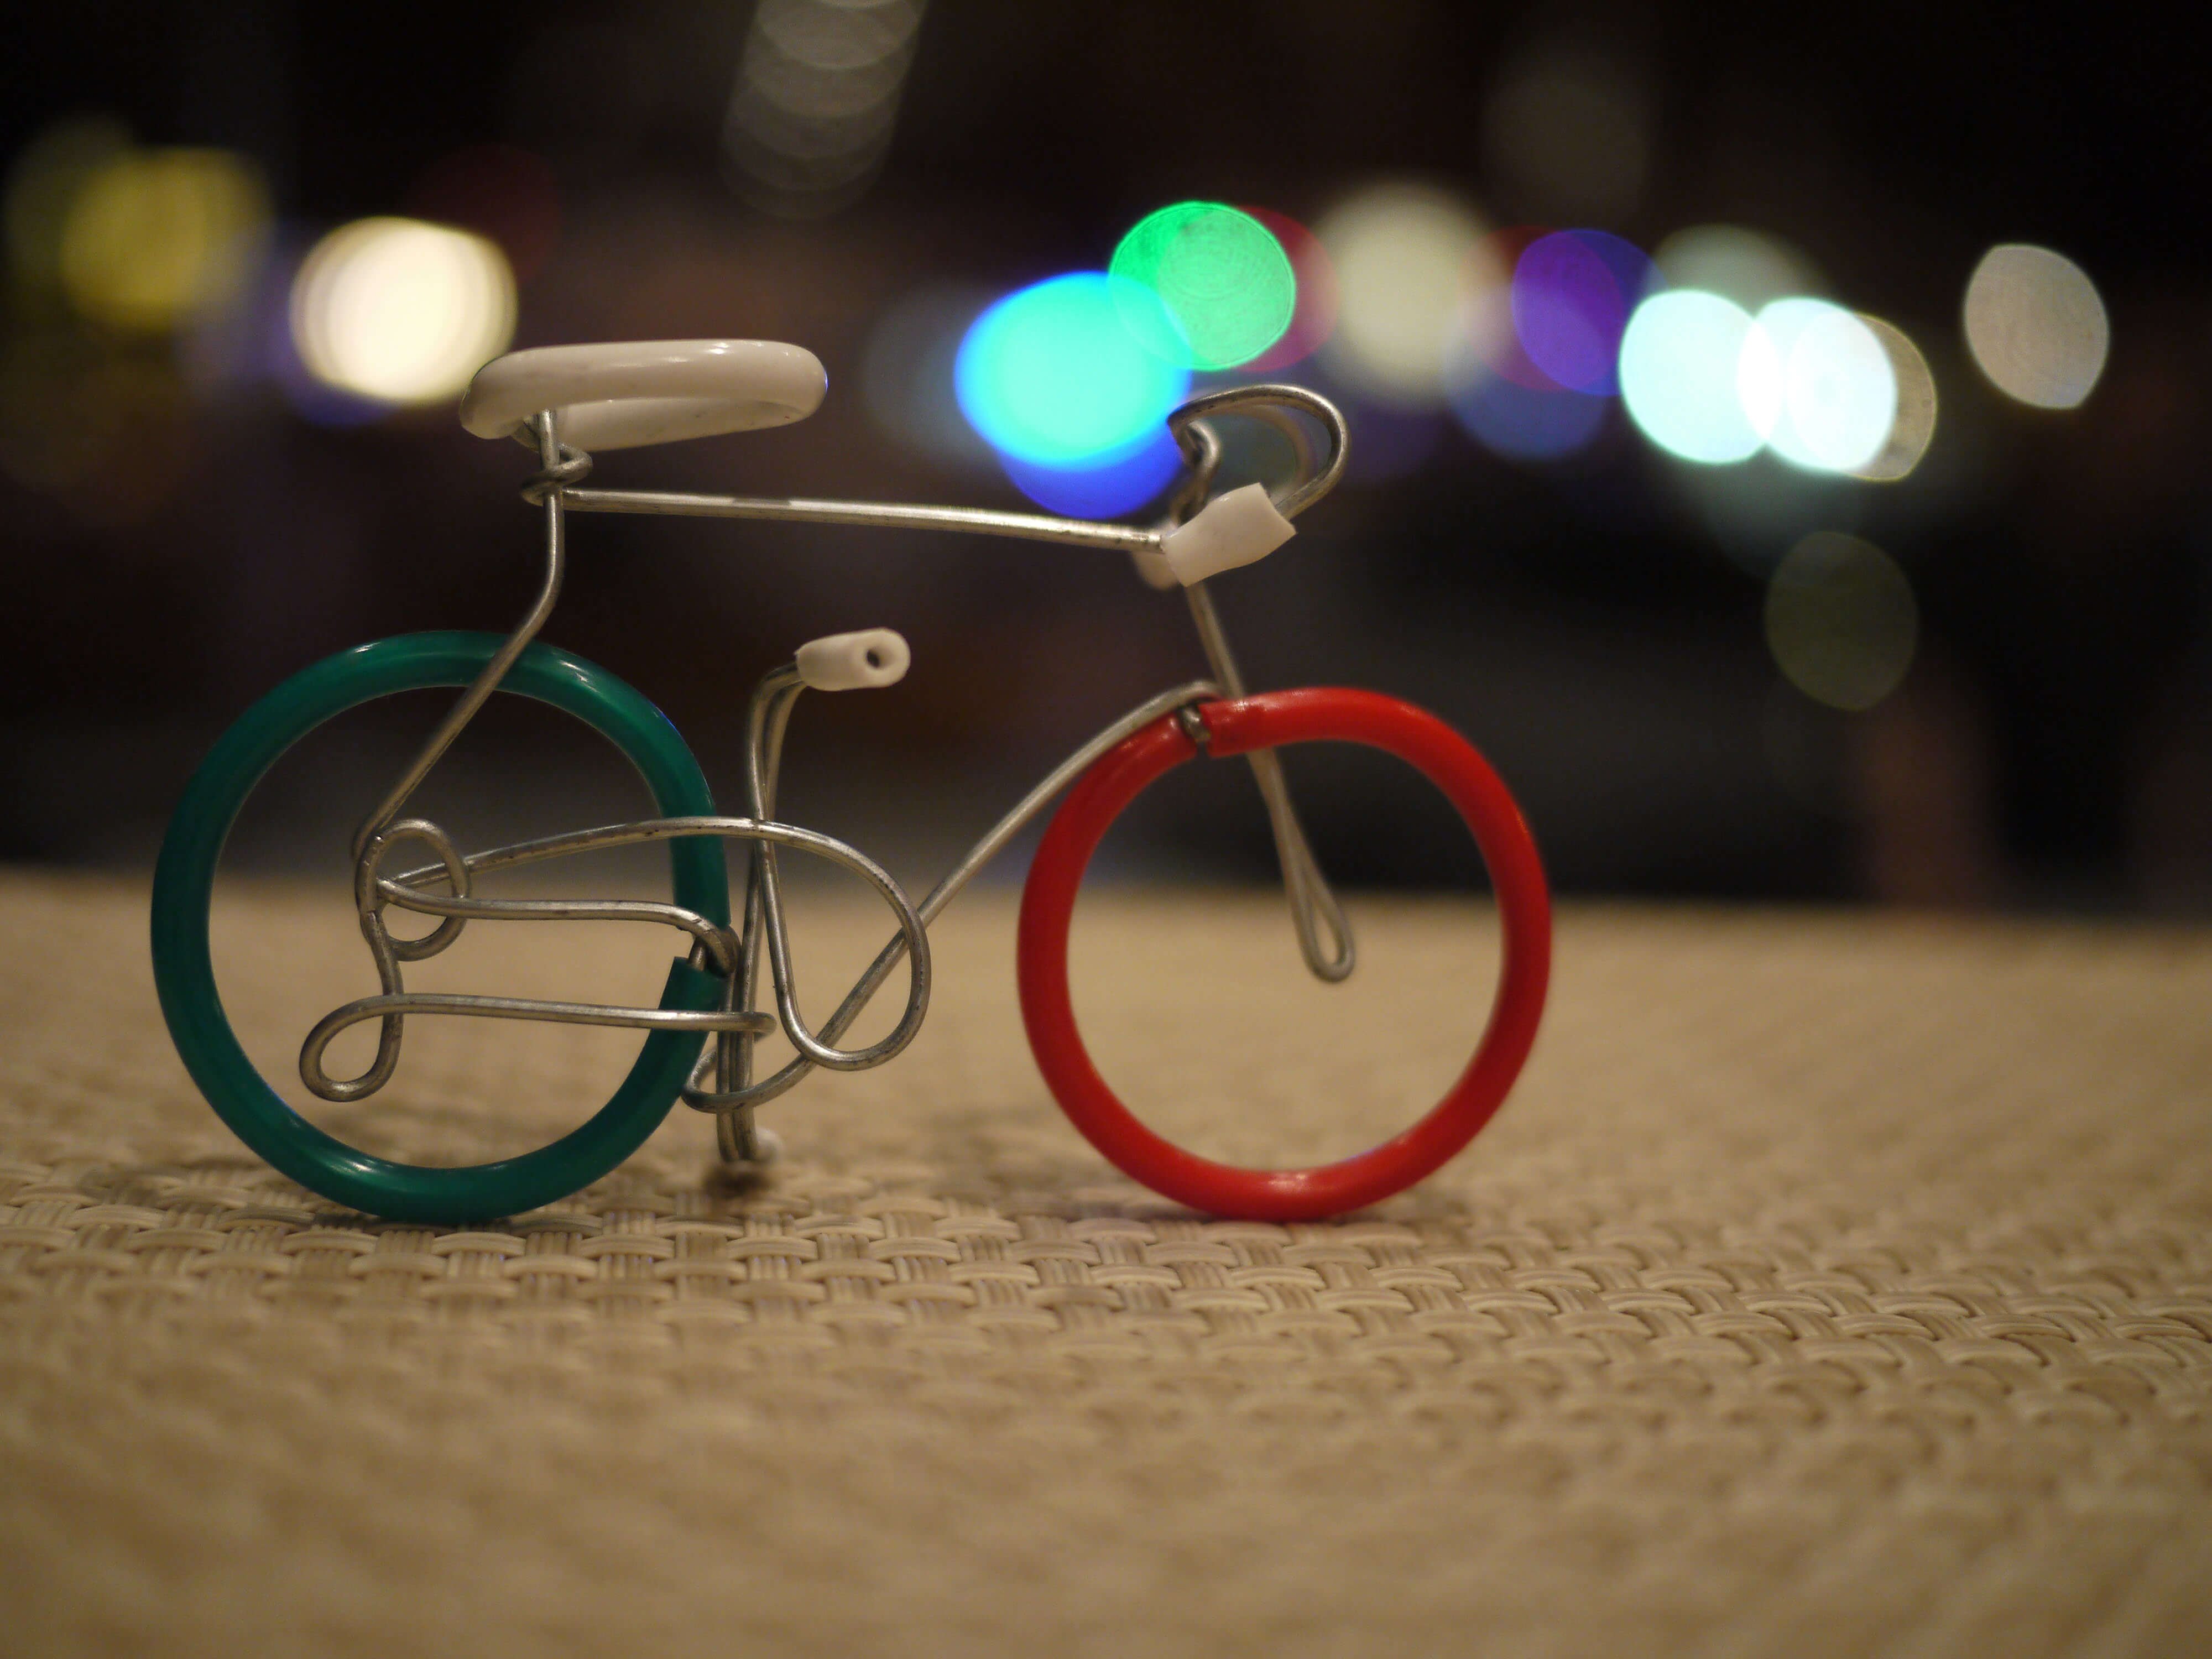 Bicycle made of wire